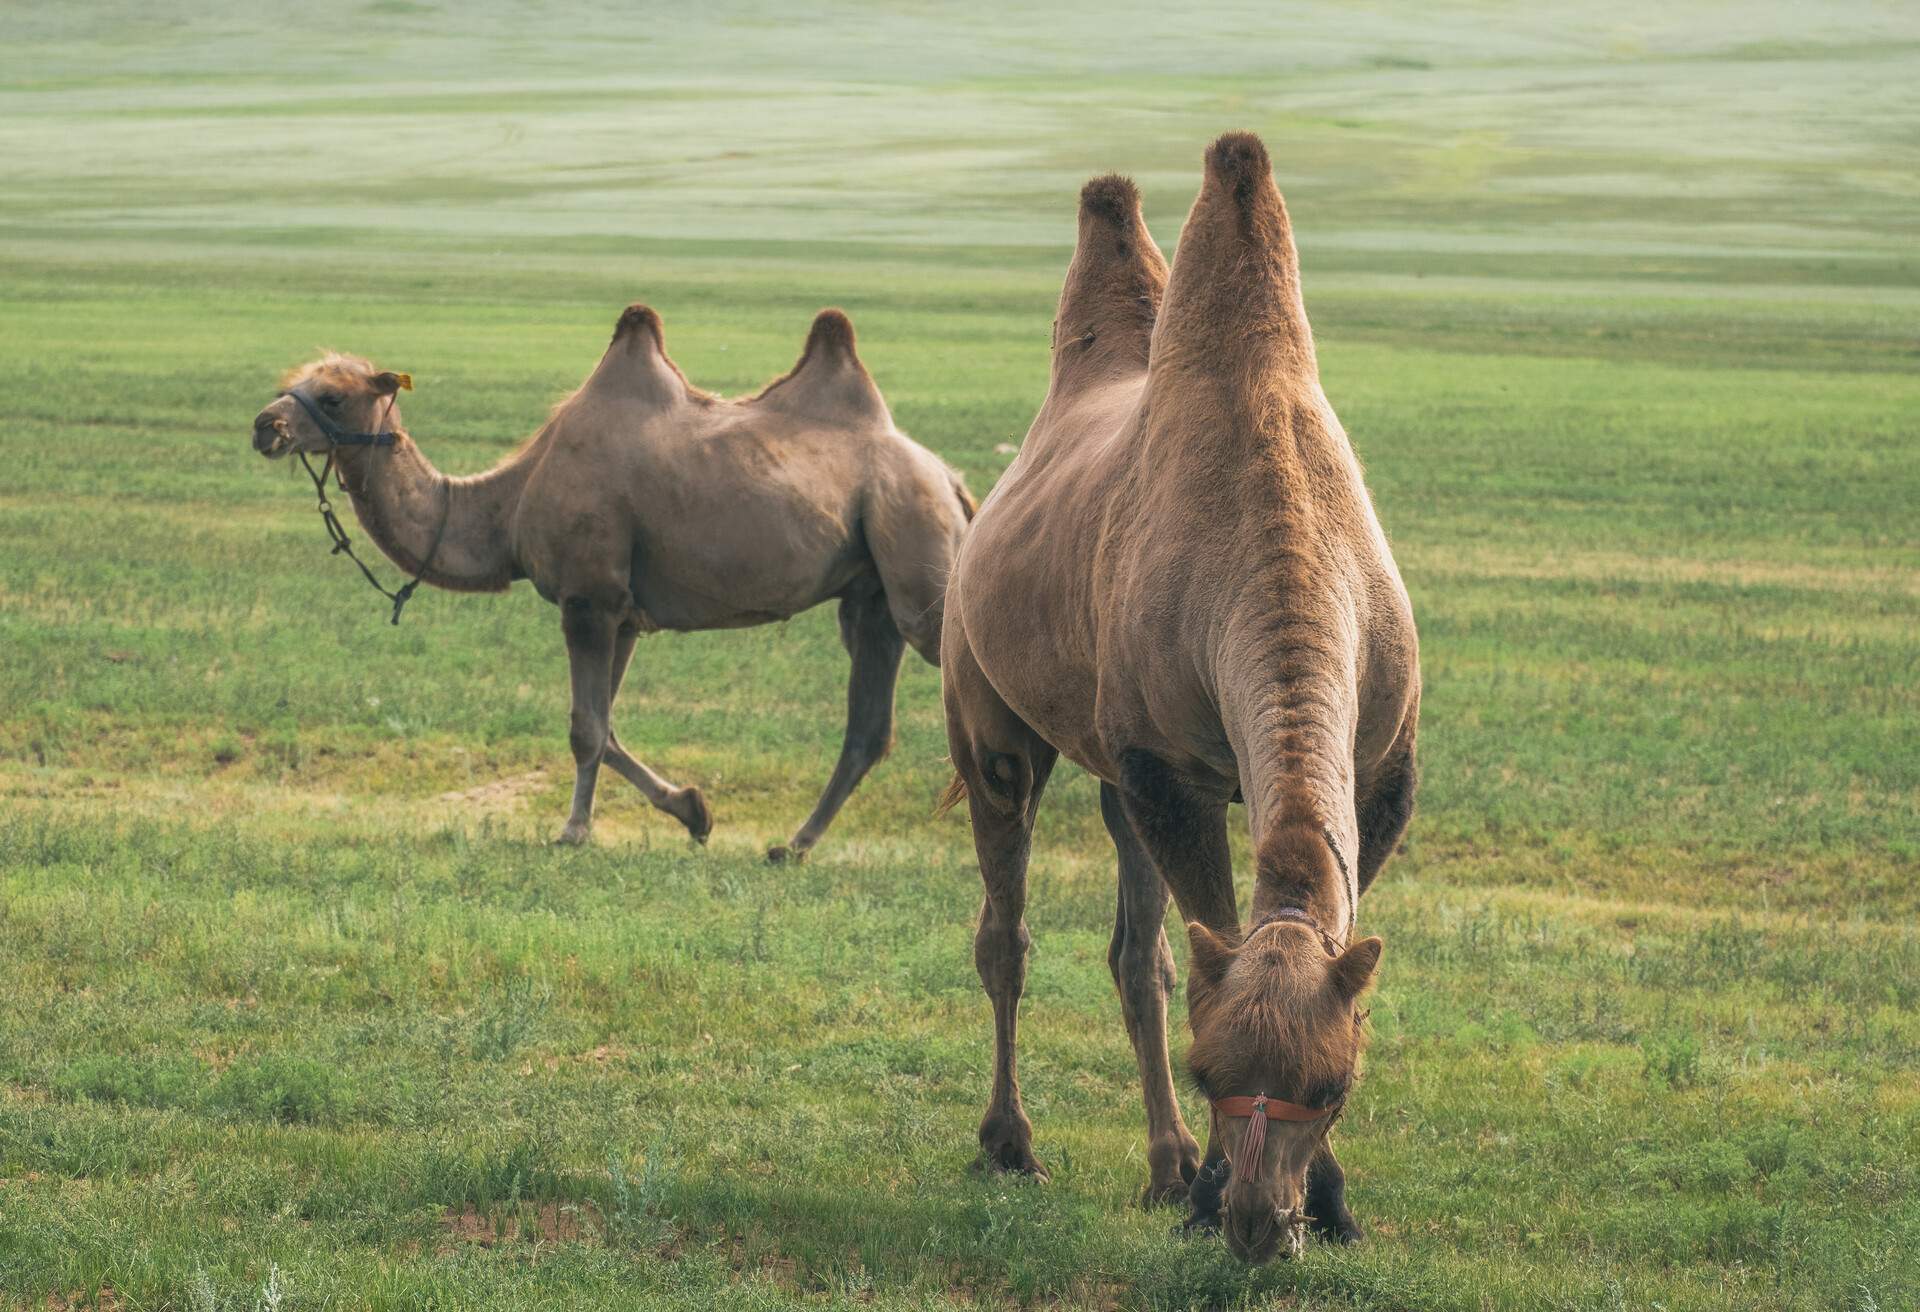 camels in a field, germany